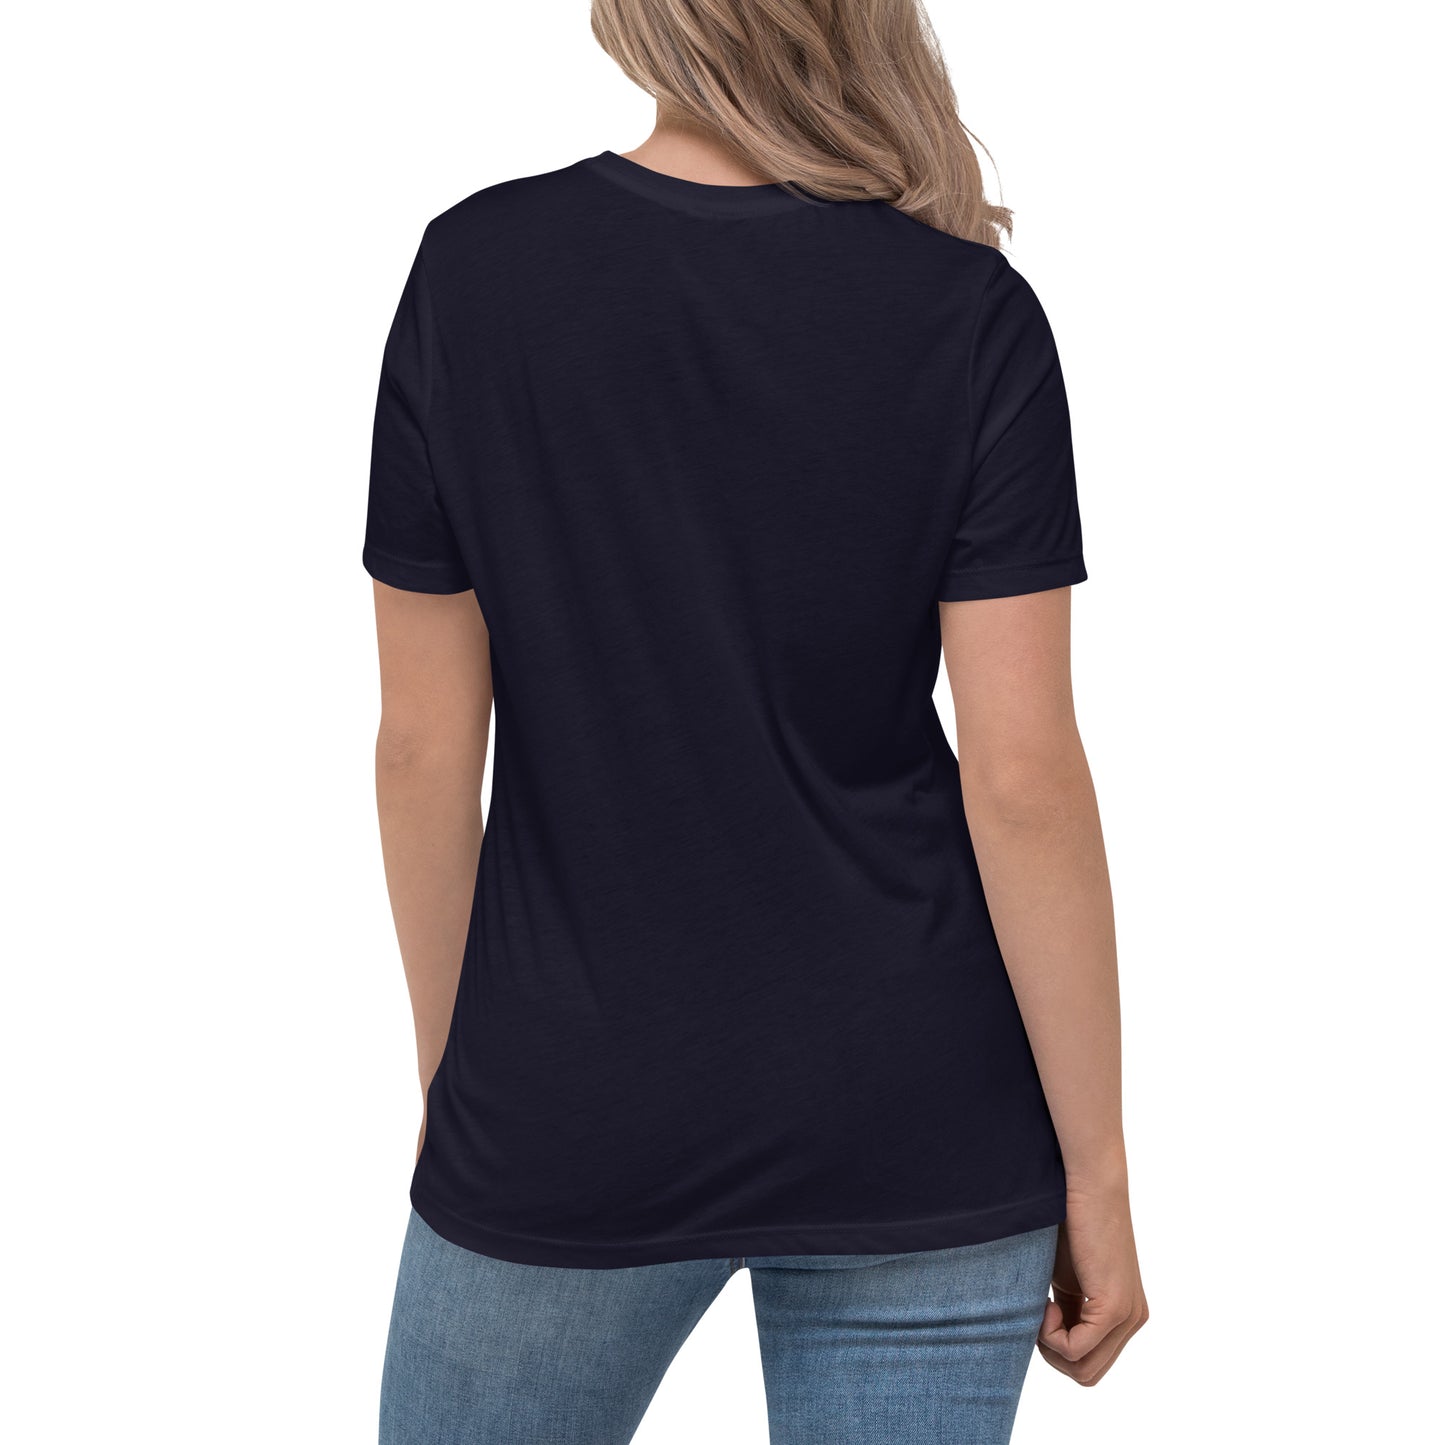 Believe Women's Relaxed Graphic Tee